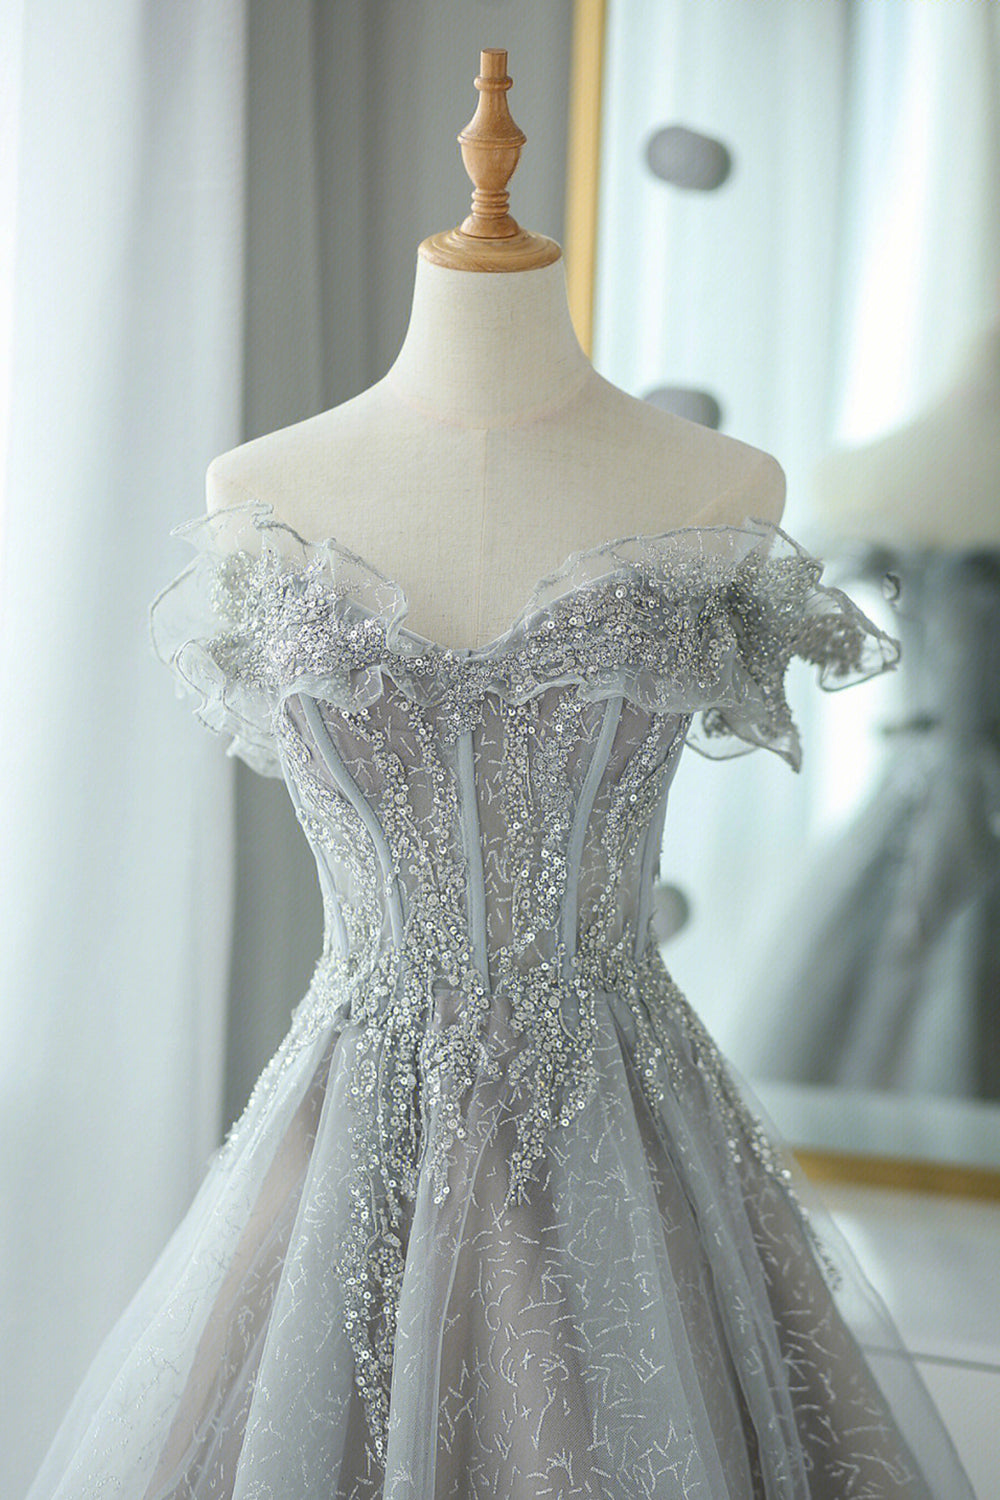 Rustic Wedding Dress, Gray Tulle Lace Floor Length Evening Dress, Off the Shoulder Prom Dress